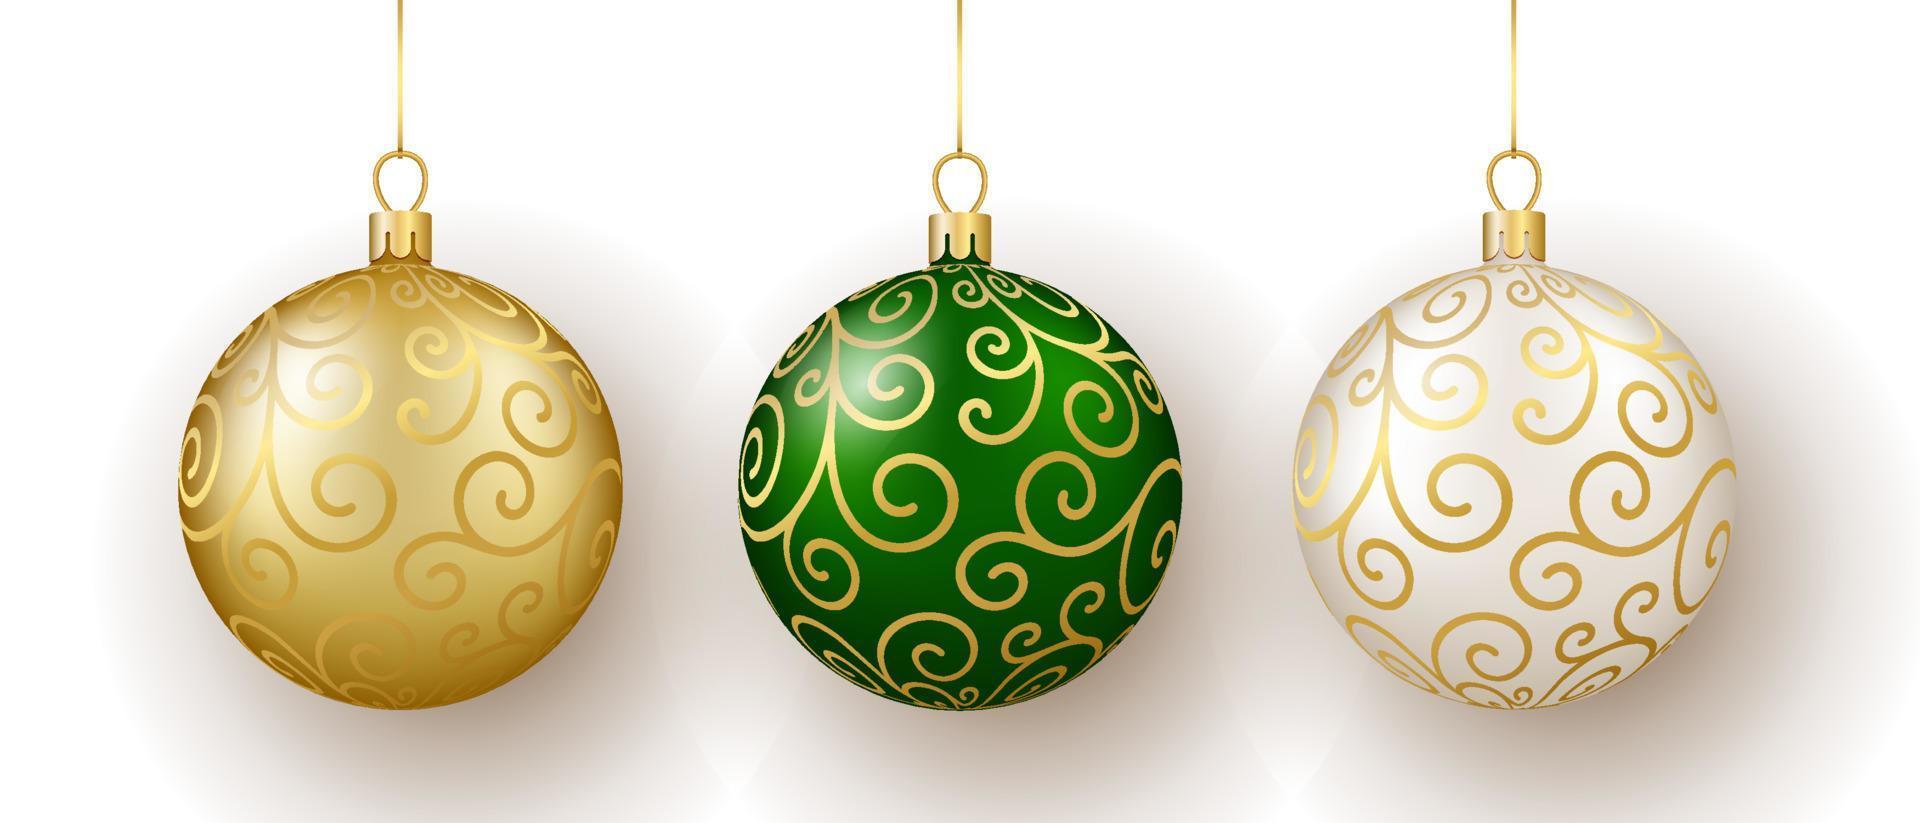 Christmas and New Year decor. Set of gold, white and green glass floral ornament balls on ribbon with bow. vector